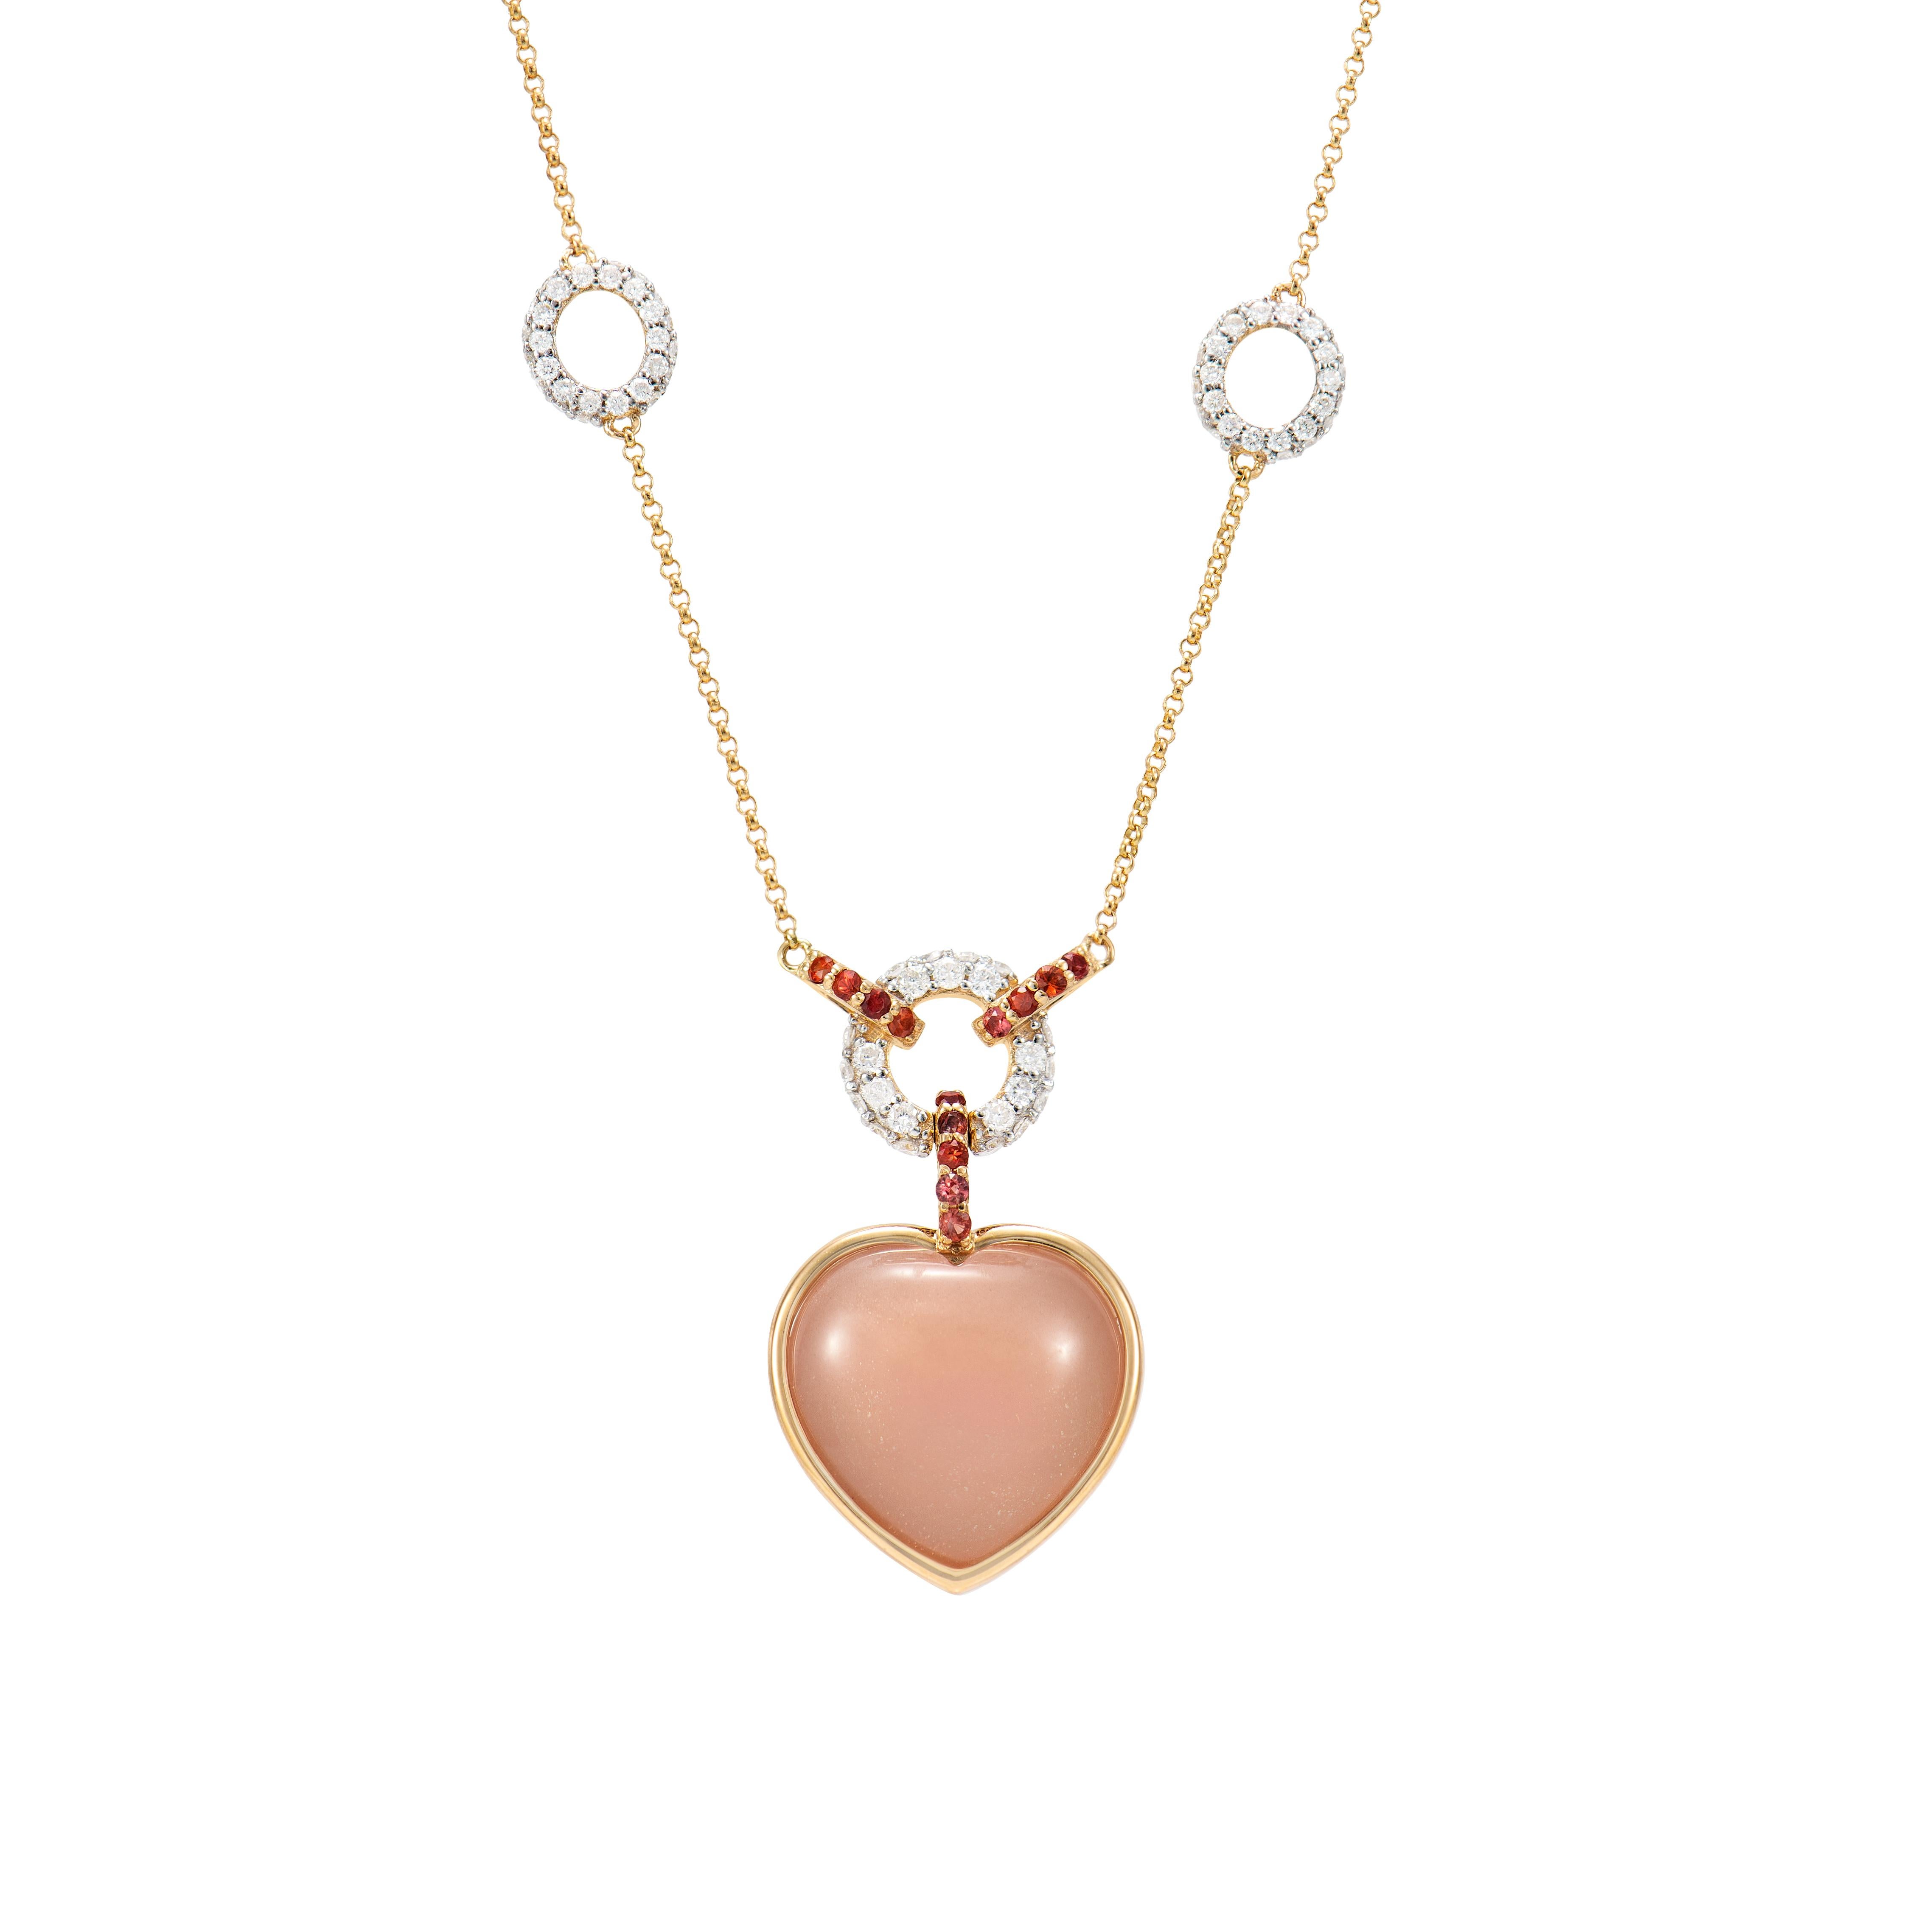 Celebrating the season of love with these delicate heart jewels! These pieces showcase beautiful gemstones with dainty accents to elevatue the beauty of the gem. 

Moonstone Necklace in 18 Karat Yellow Gold with Orange Sapphire and White